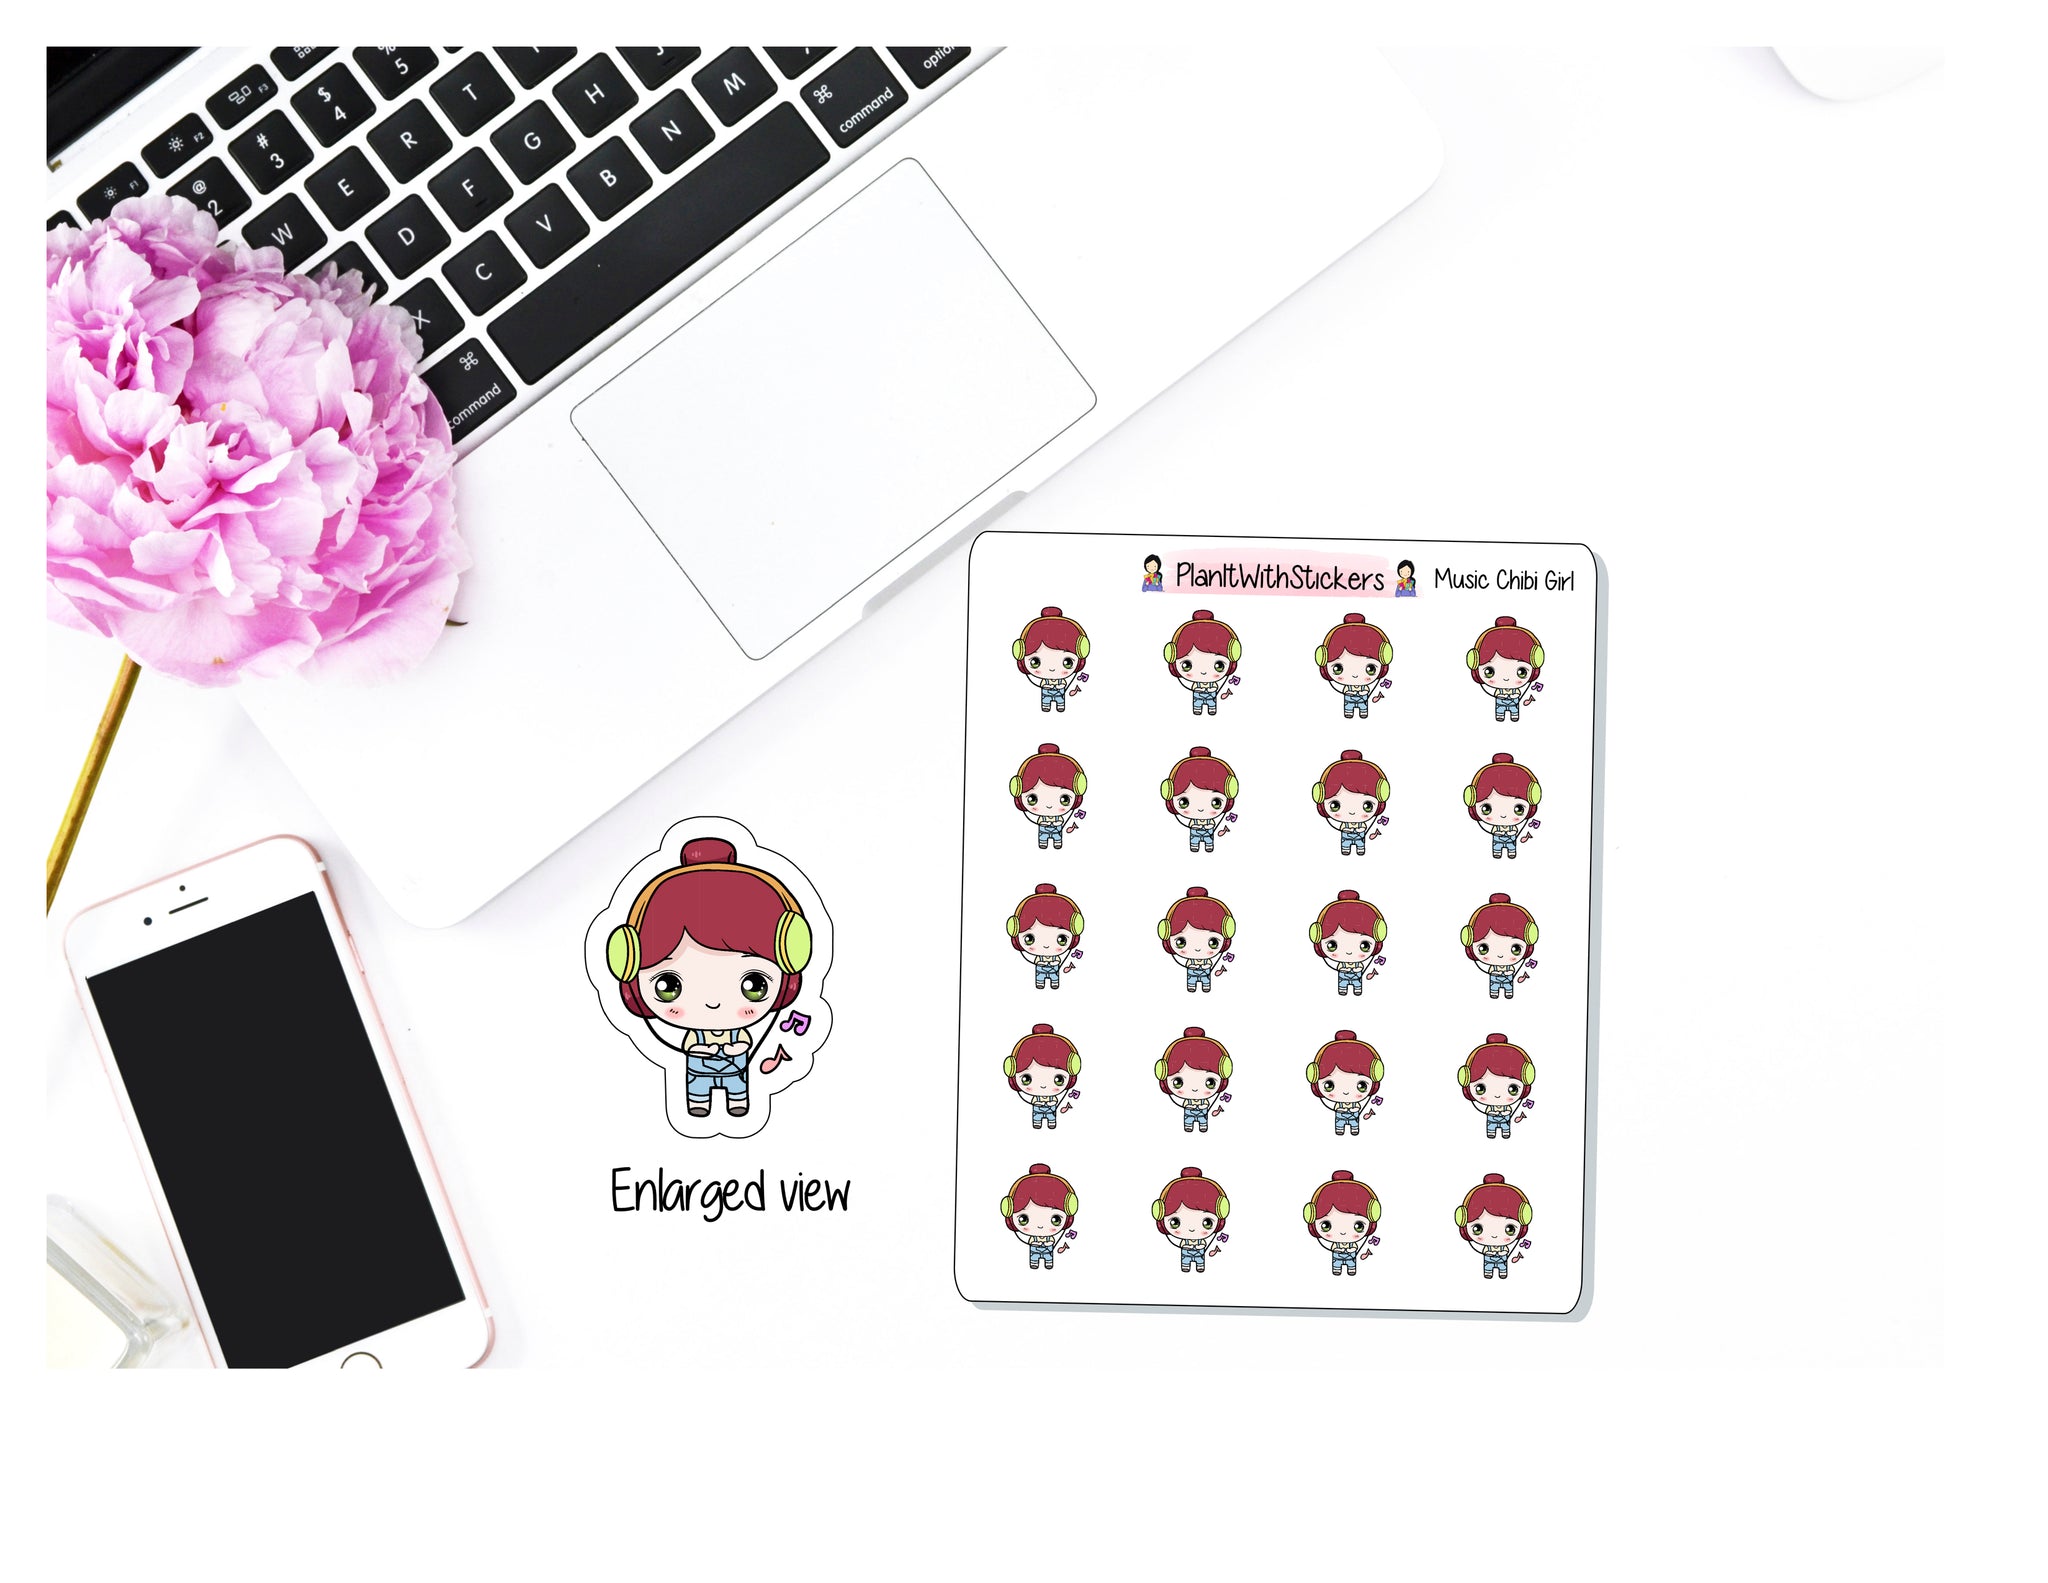 Music Chibi Girl Sticker for , Plum Paper, Recollections, and similar planners